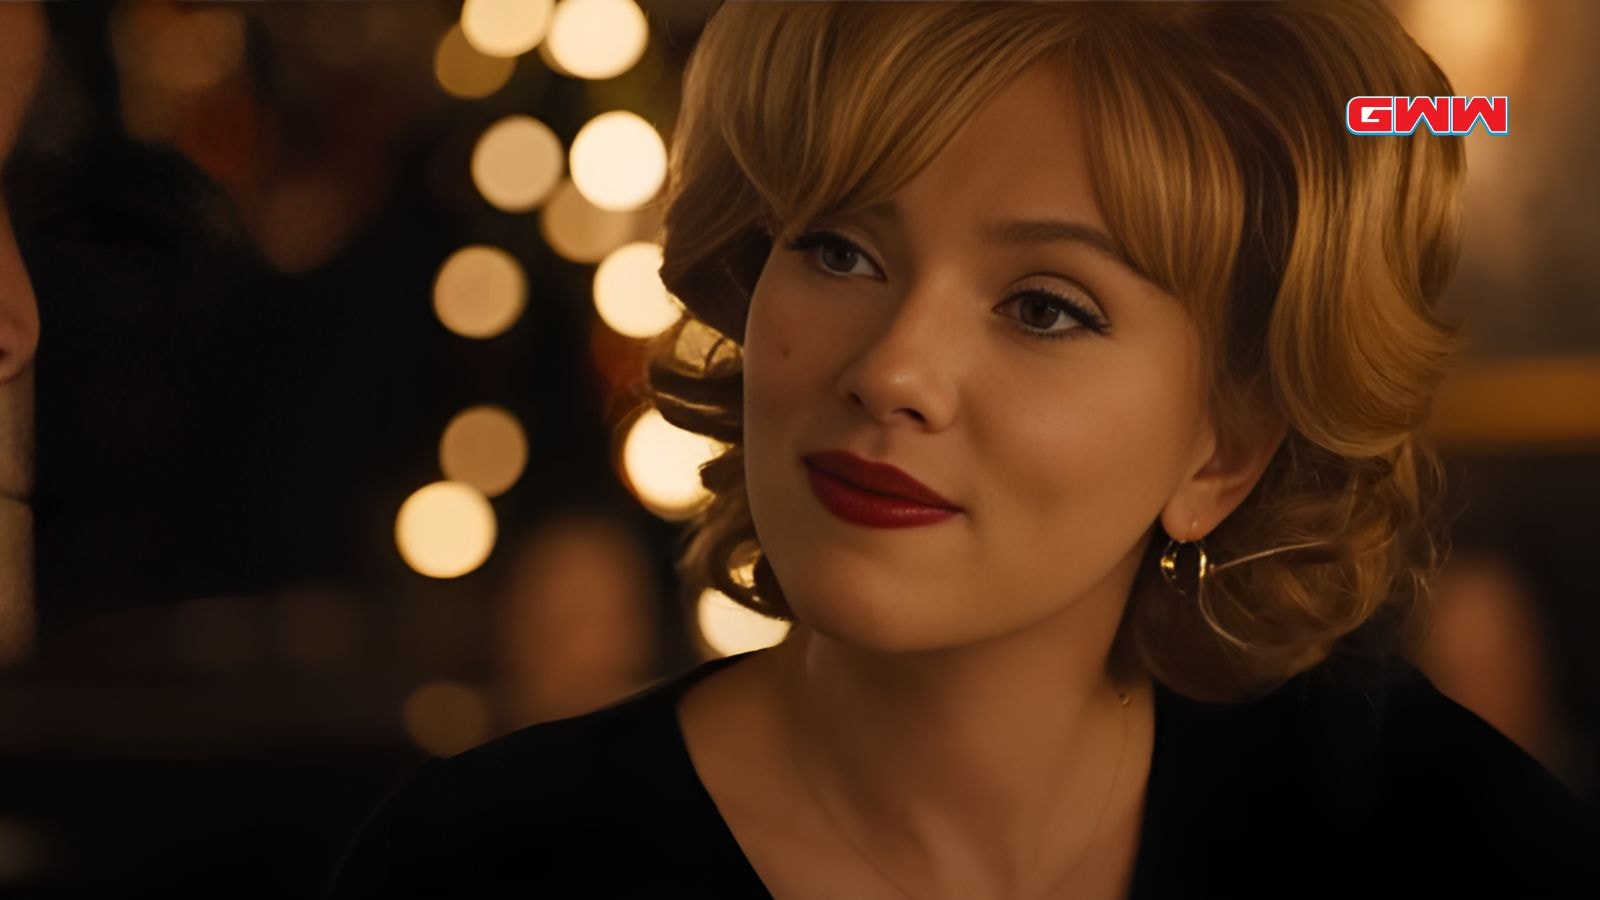 Kelly with curled blonde hair and red lipstick, smiling in a dimly lit setting